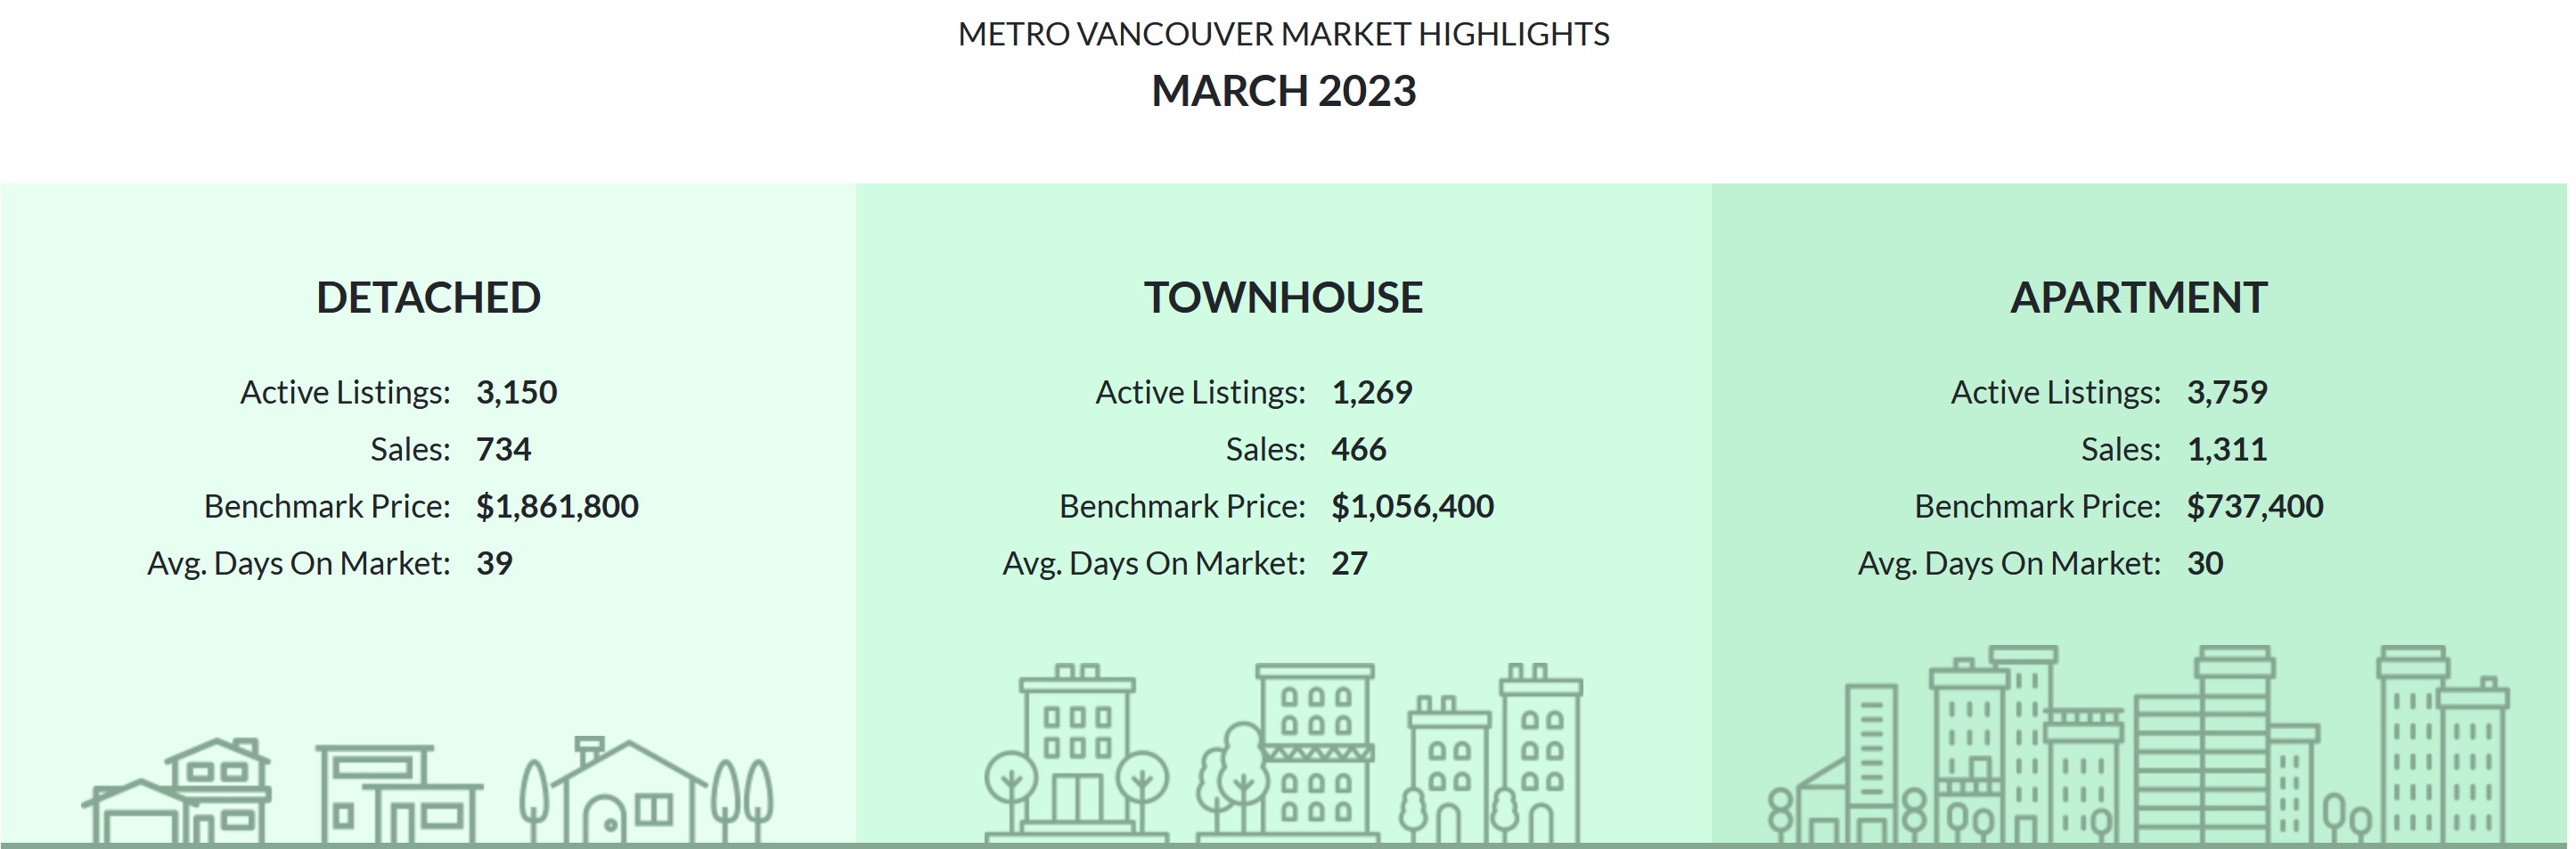 Metro Vancouver March Market Highlights